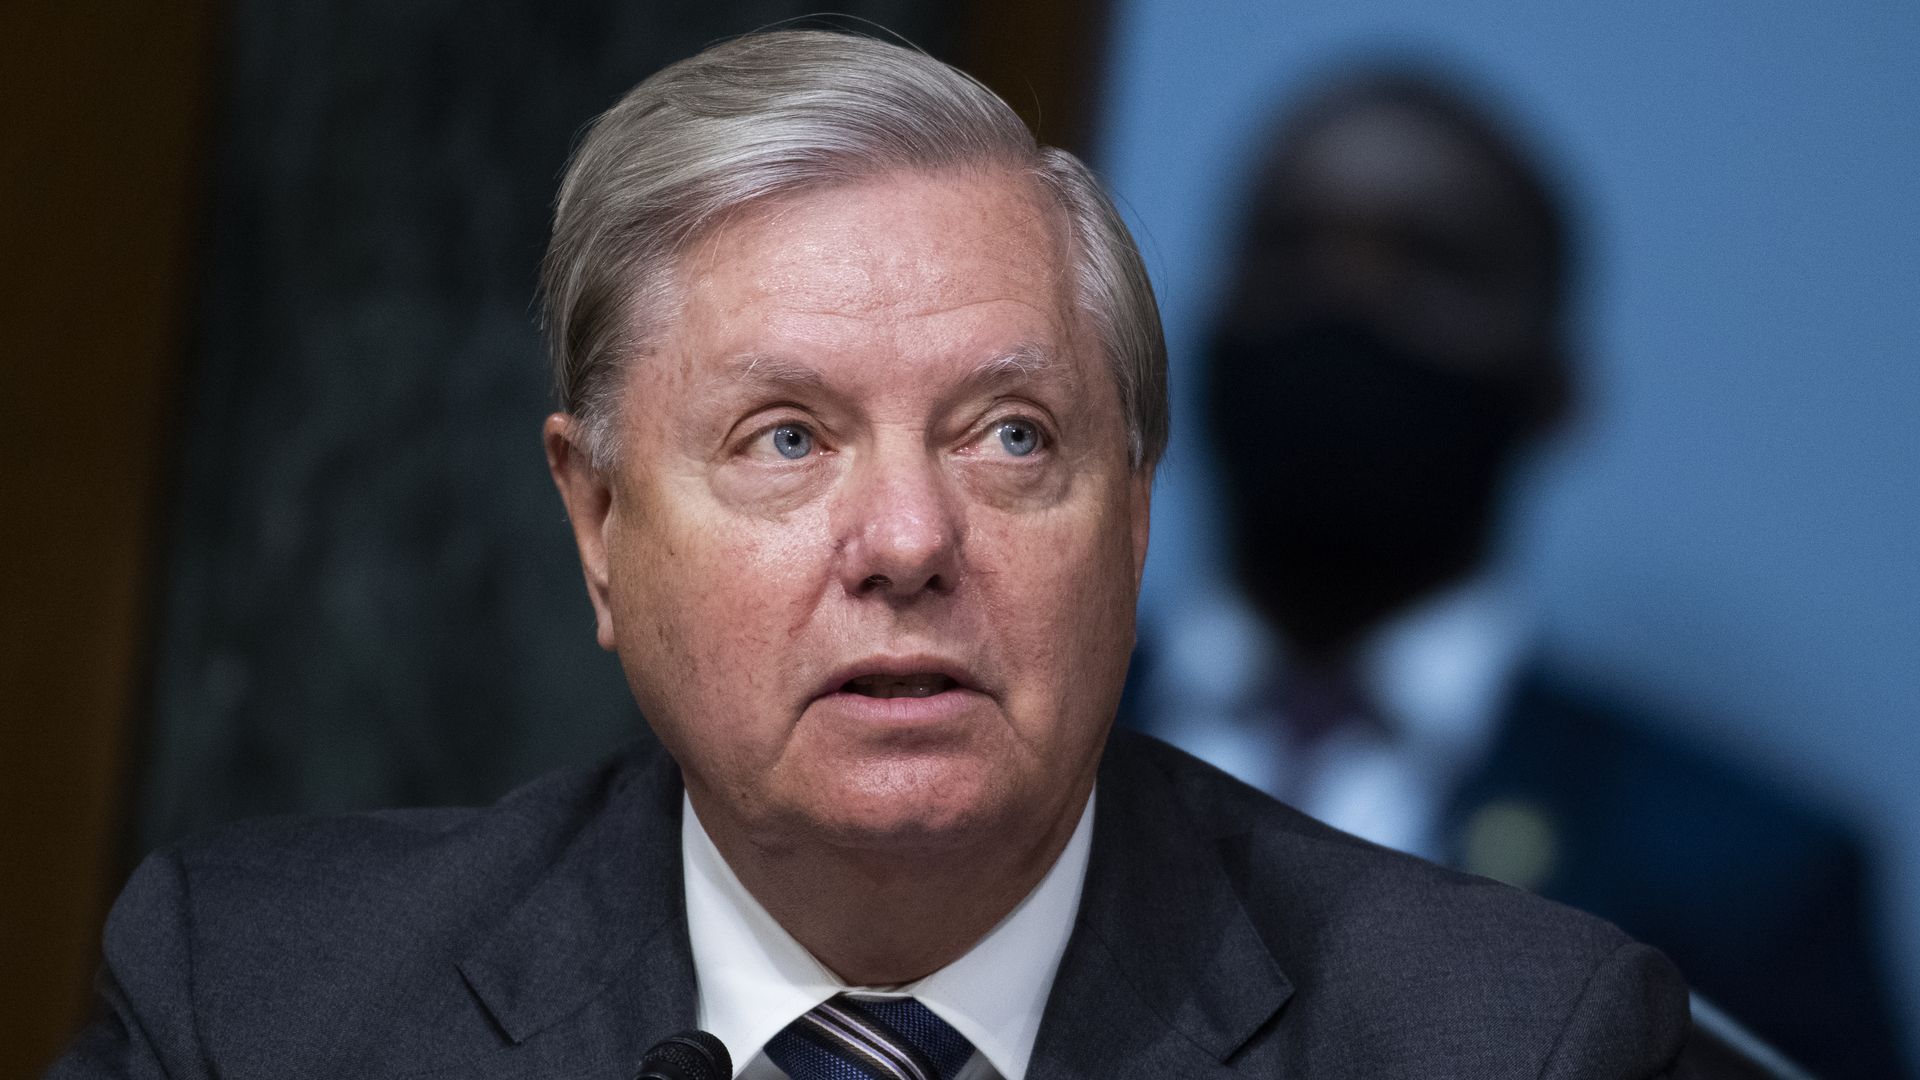 Lindsey Graham in a suit